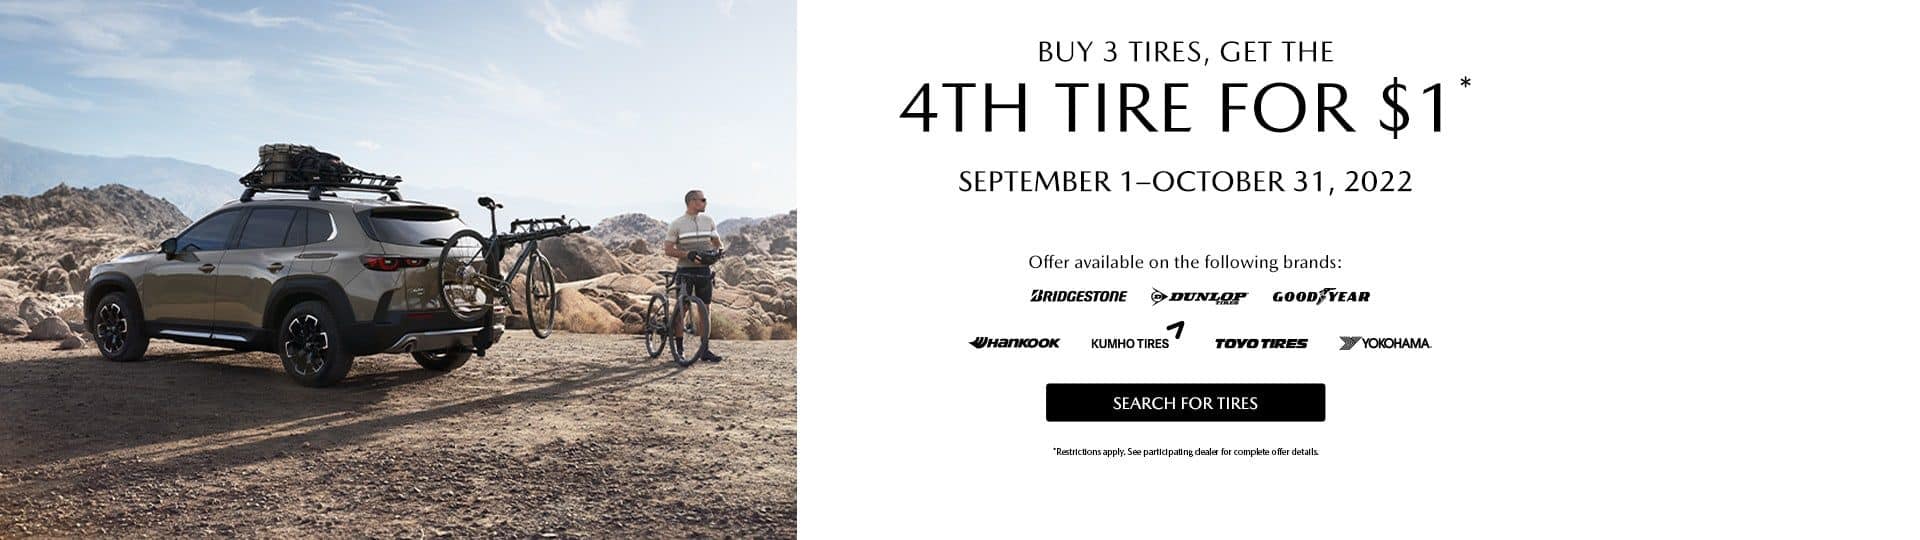 Buy 3 tires get the 4th for $1